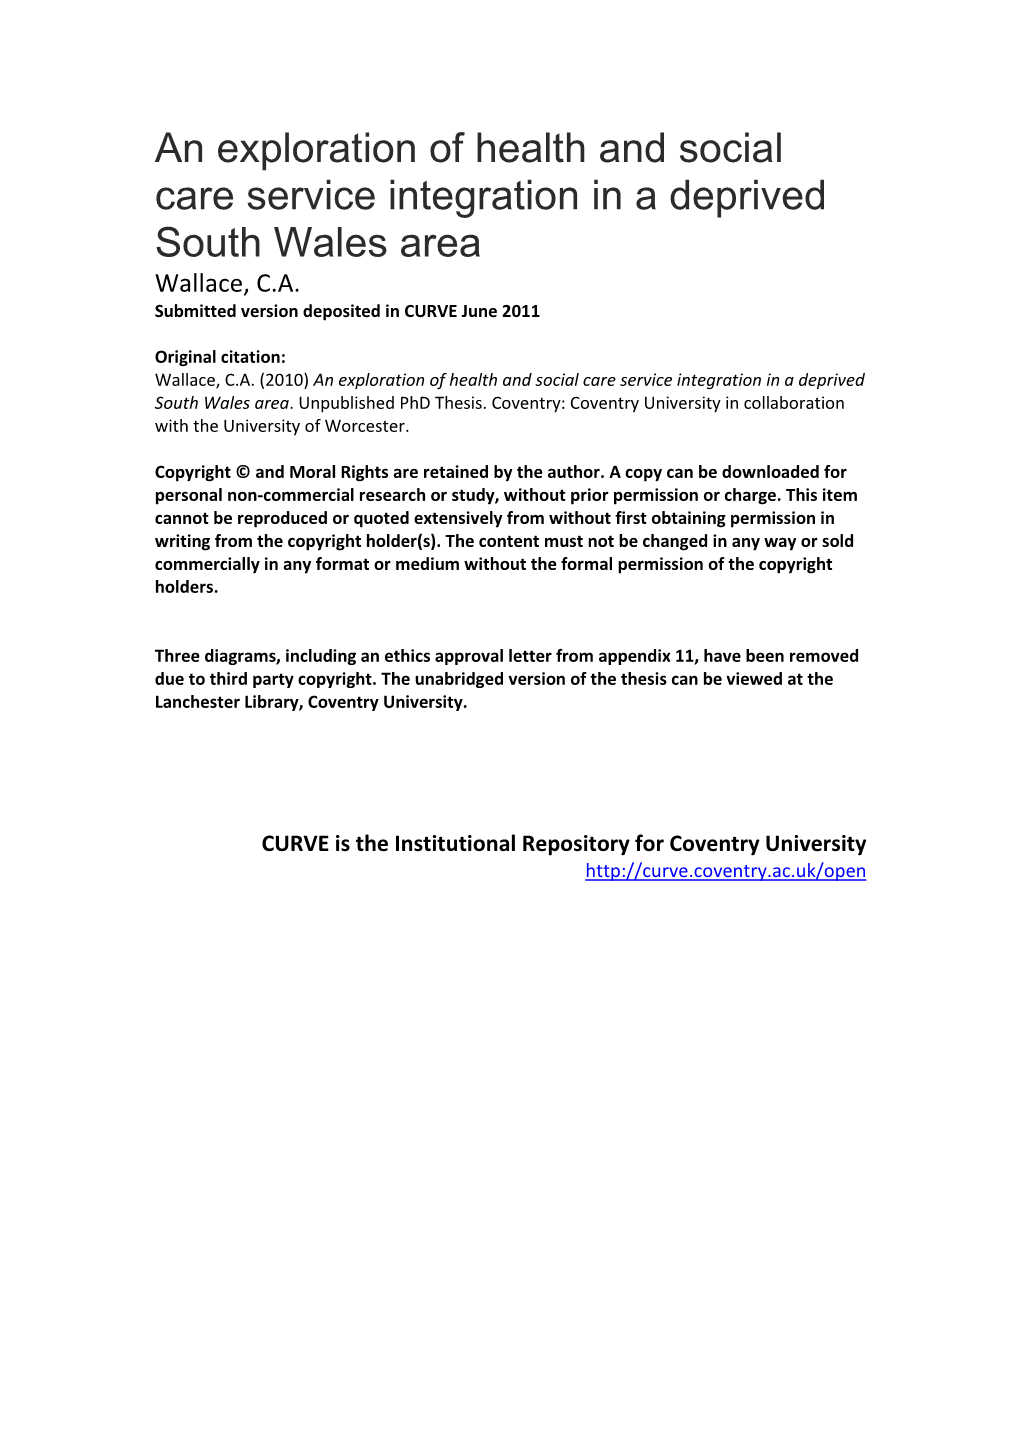 An Exploration of Health and Social Care Service Integration in a Deprived South Wales Area Wallace, C.A